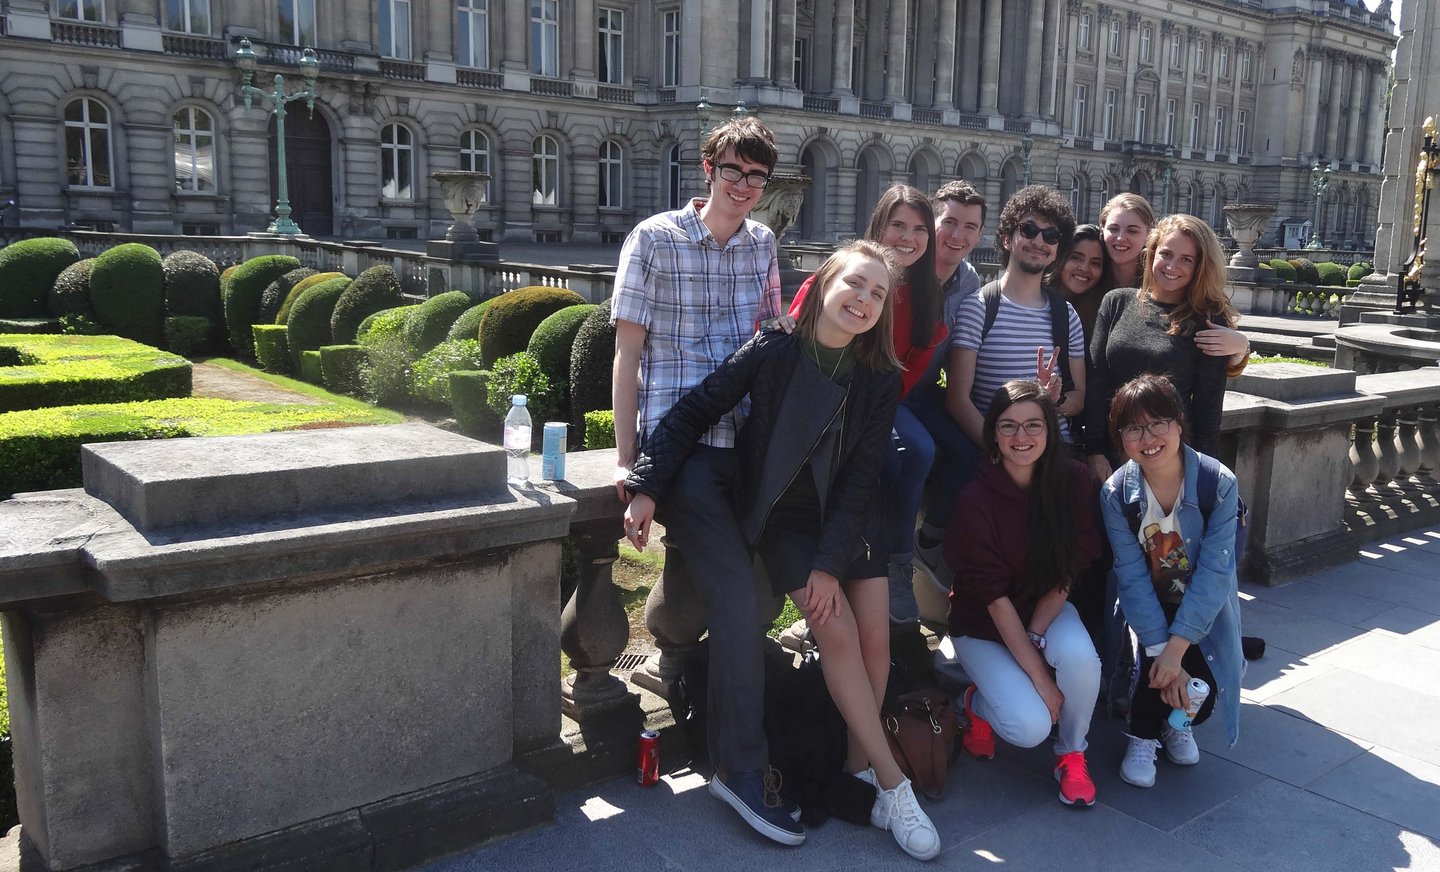 Group picture in front of the Royal Palace of Brussels.